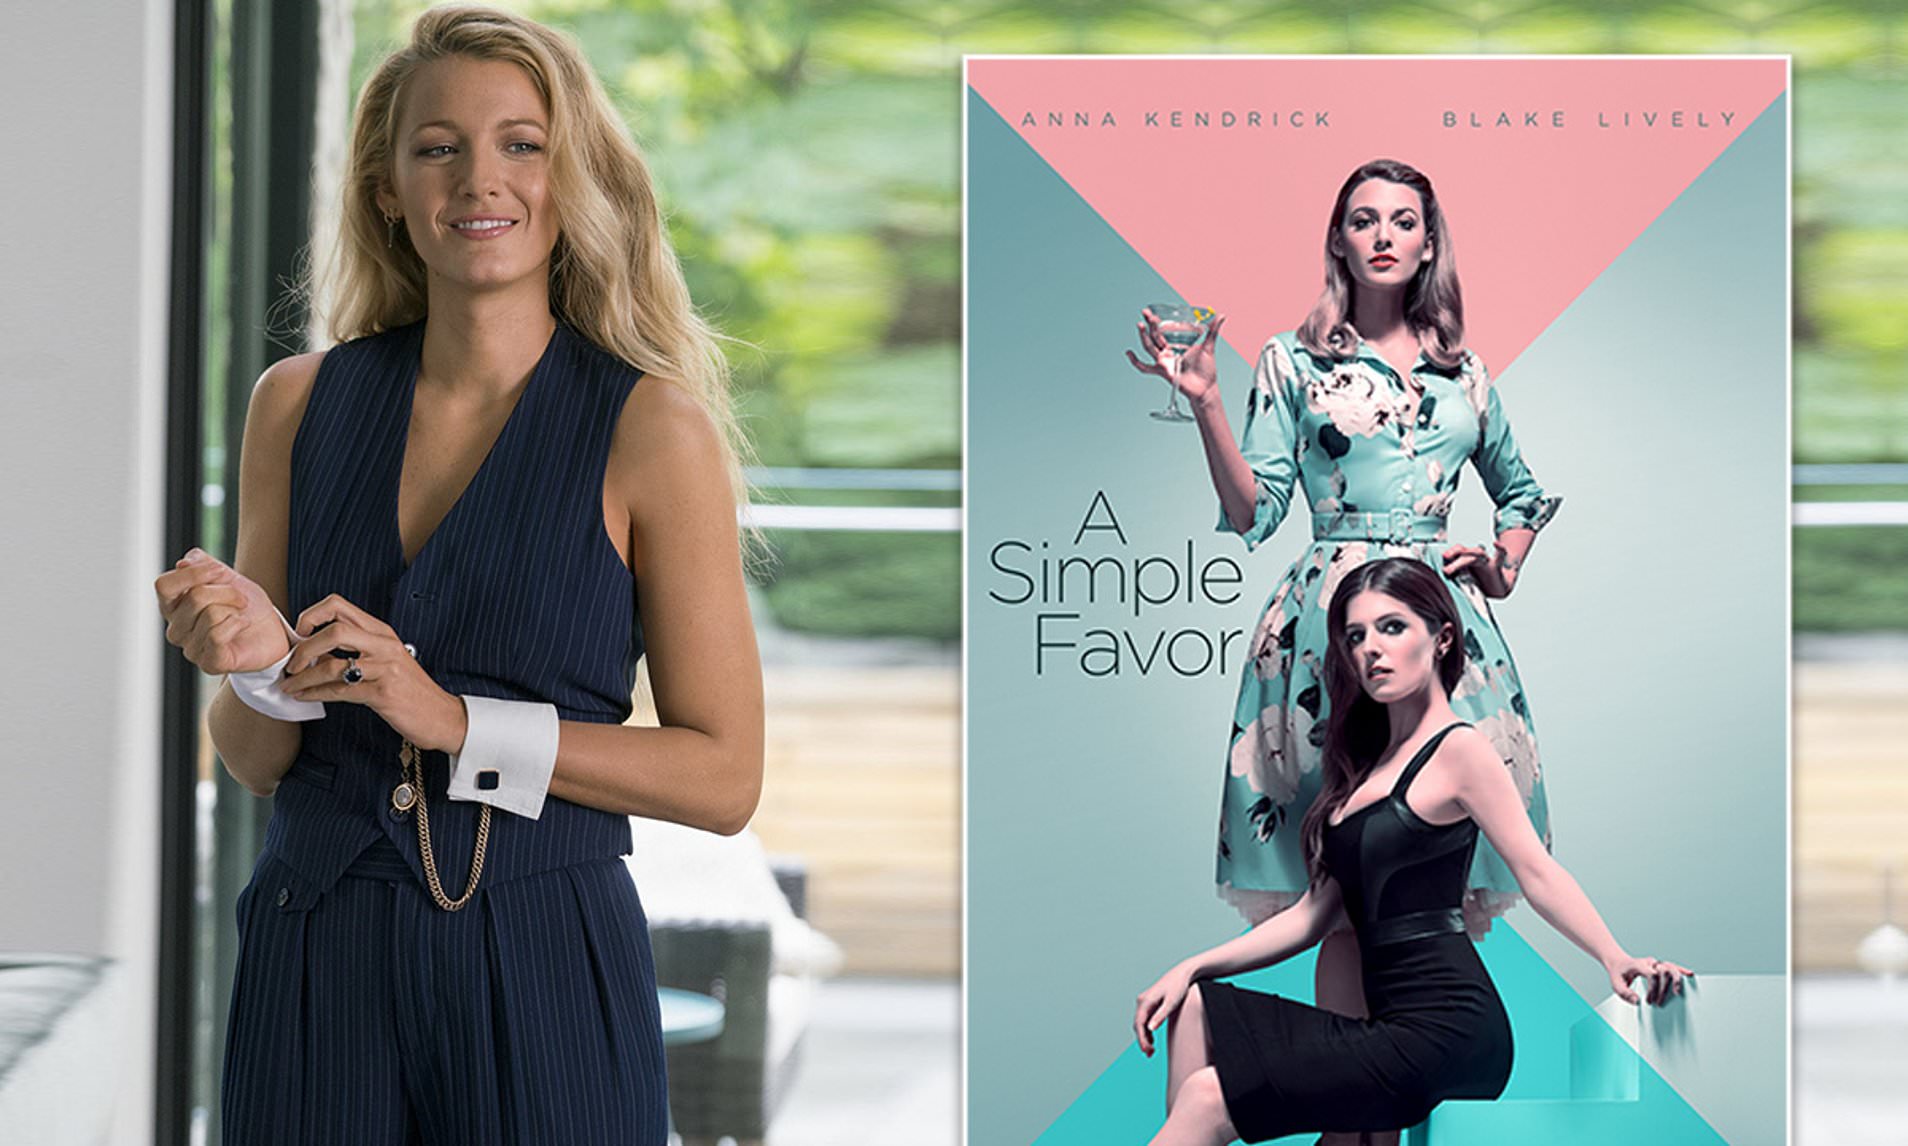 Blake Lively A Simple Favor 2018 Movie Poster Wallpapers